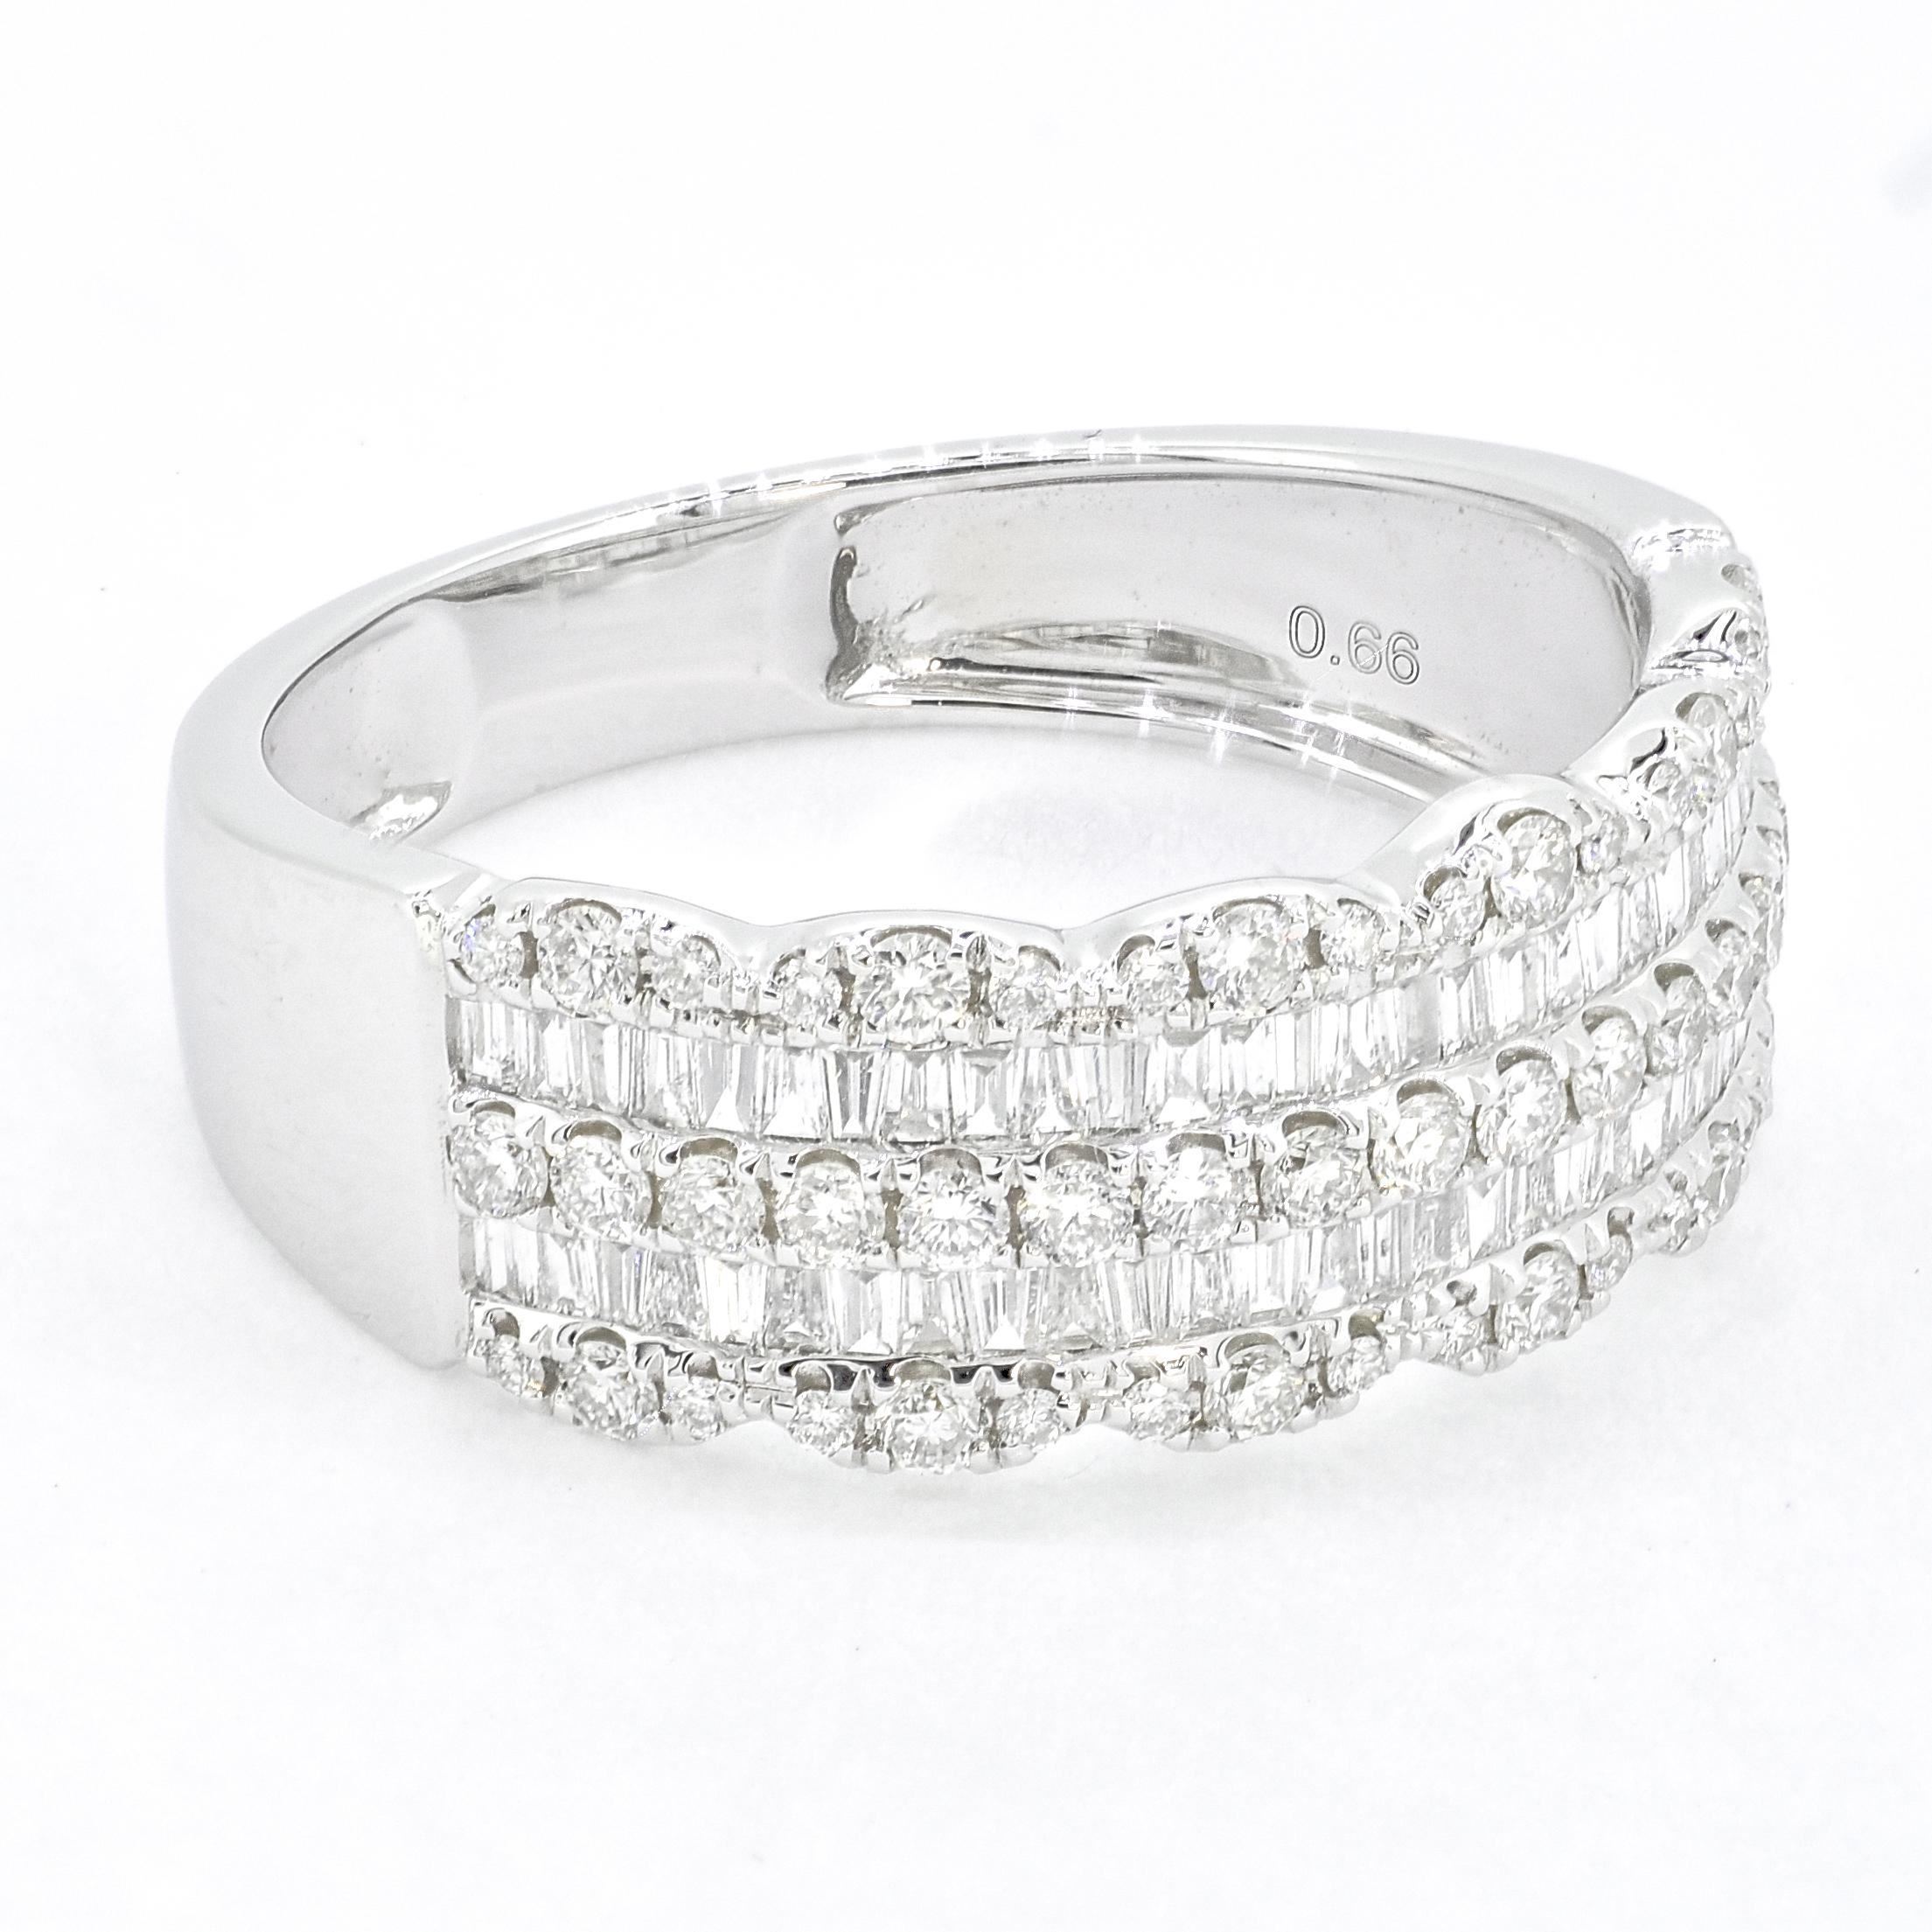 If you're looking for a beautiful and versatile diamond band that can be worn alone or stacked with other rings, consider a baguette and round diamond channel set 18 kt White gold band.

 This exquisite piece features a row of alternating baguette